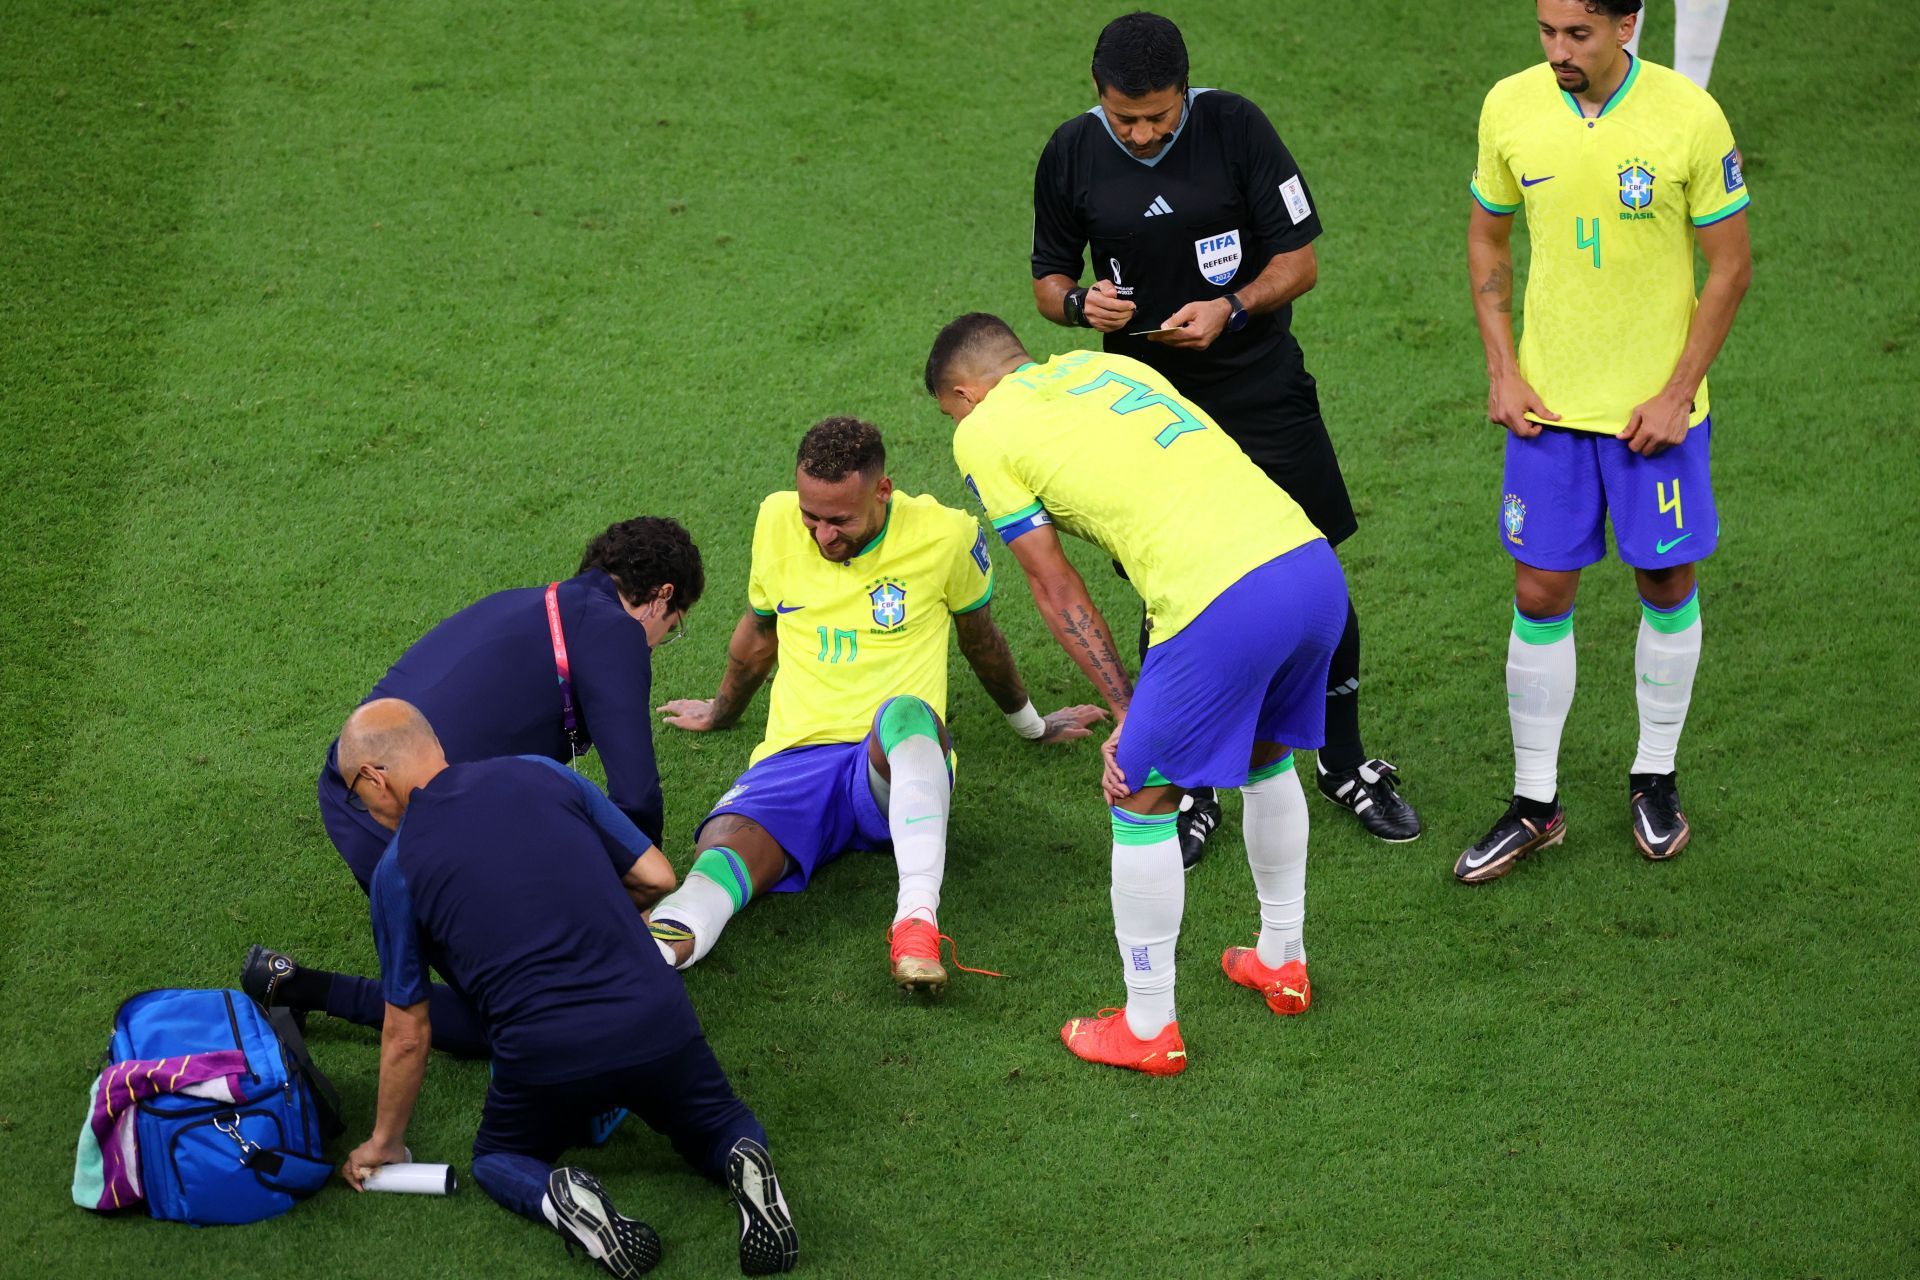 A worrying sight for Selecao